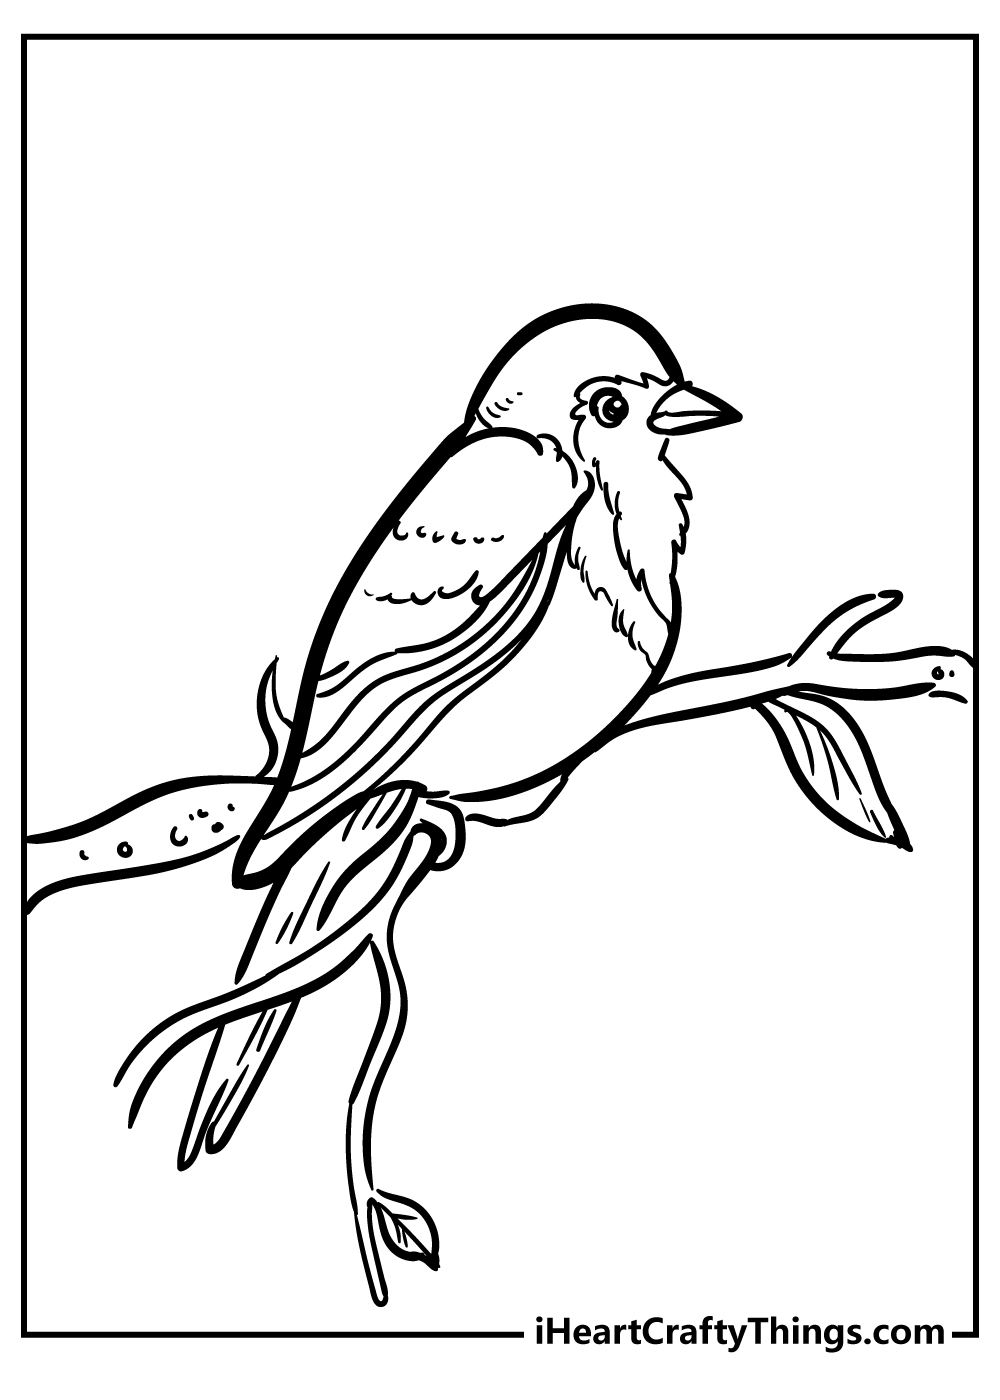 Robin Coloring Pages for kids free download